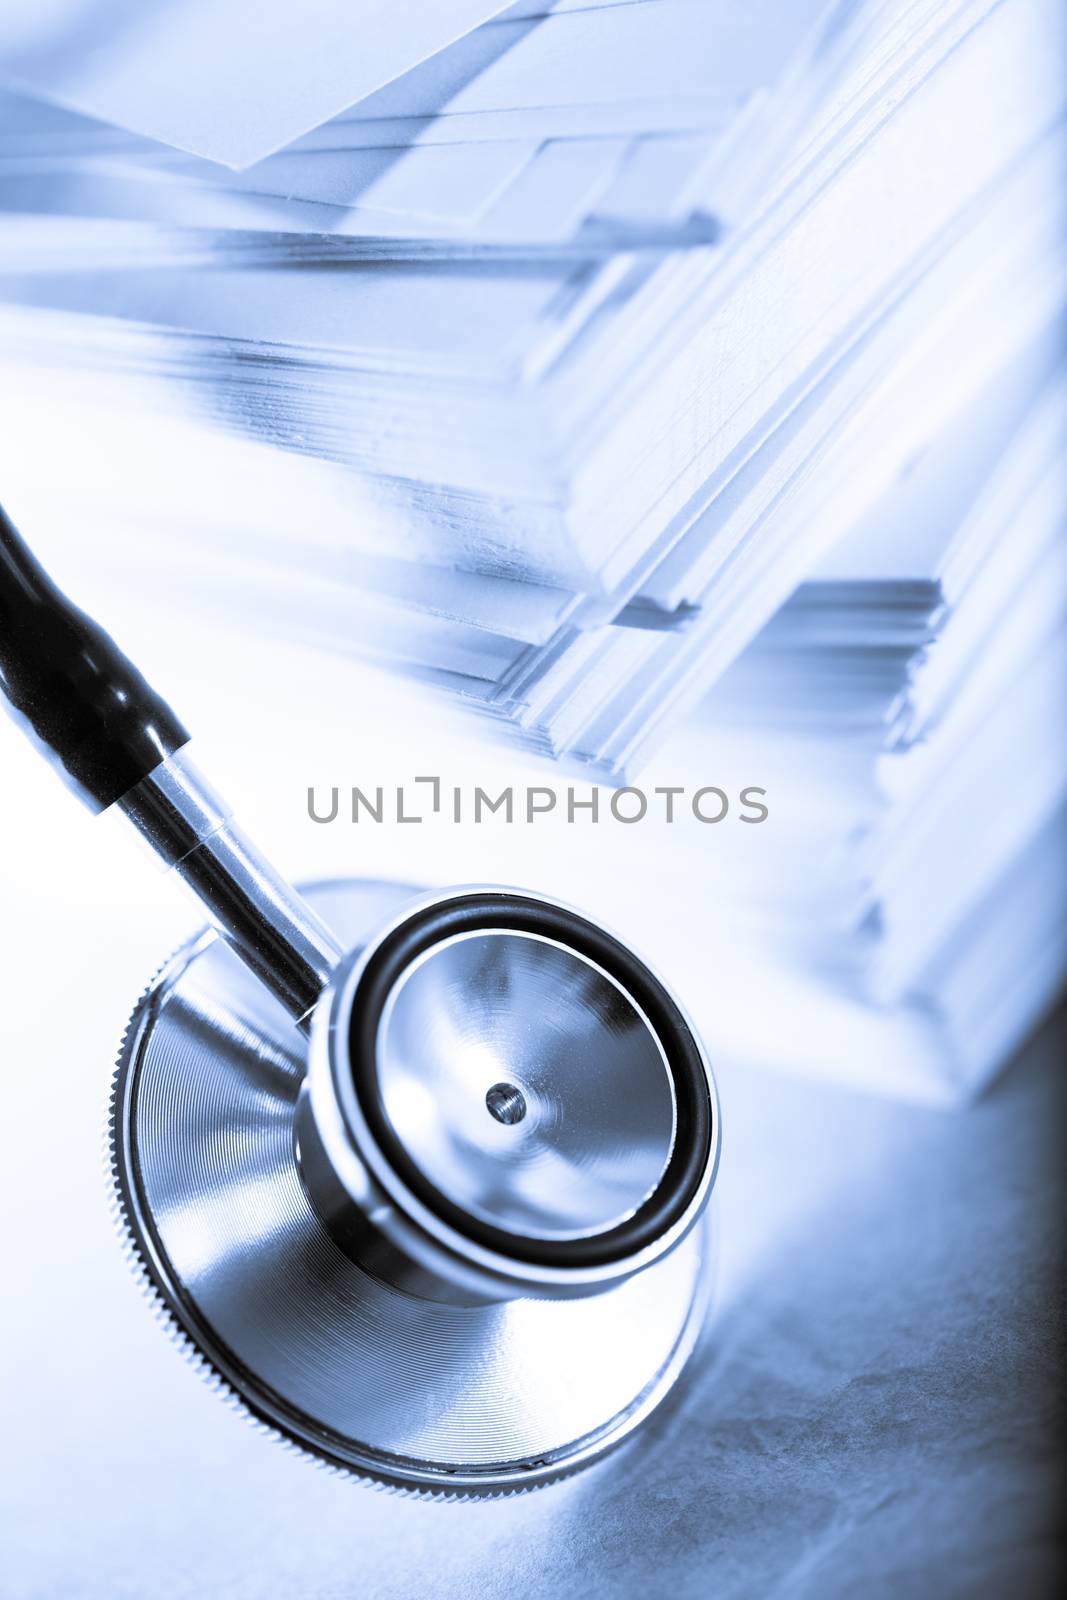 Stethoscope and heap of paper cards